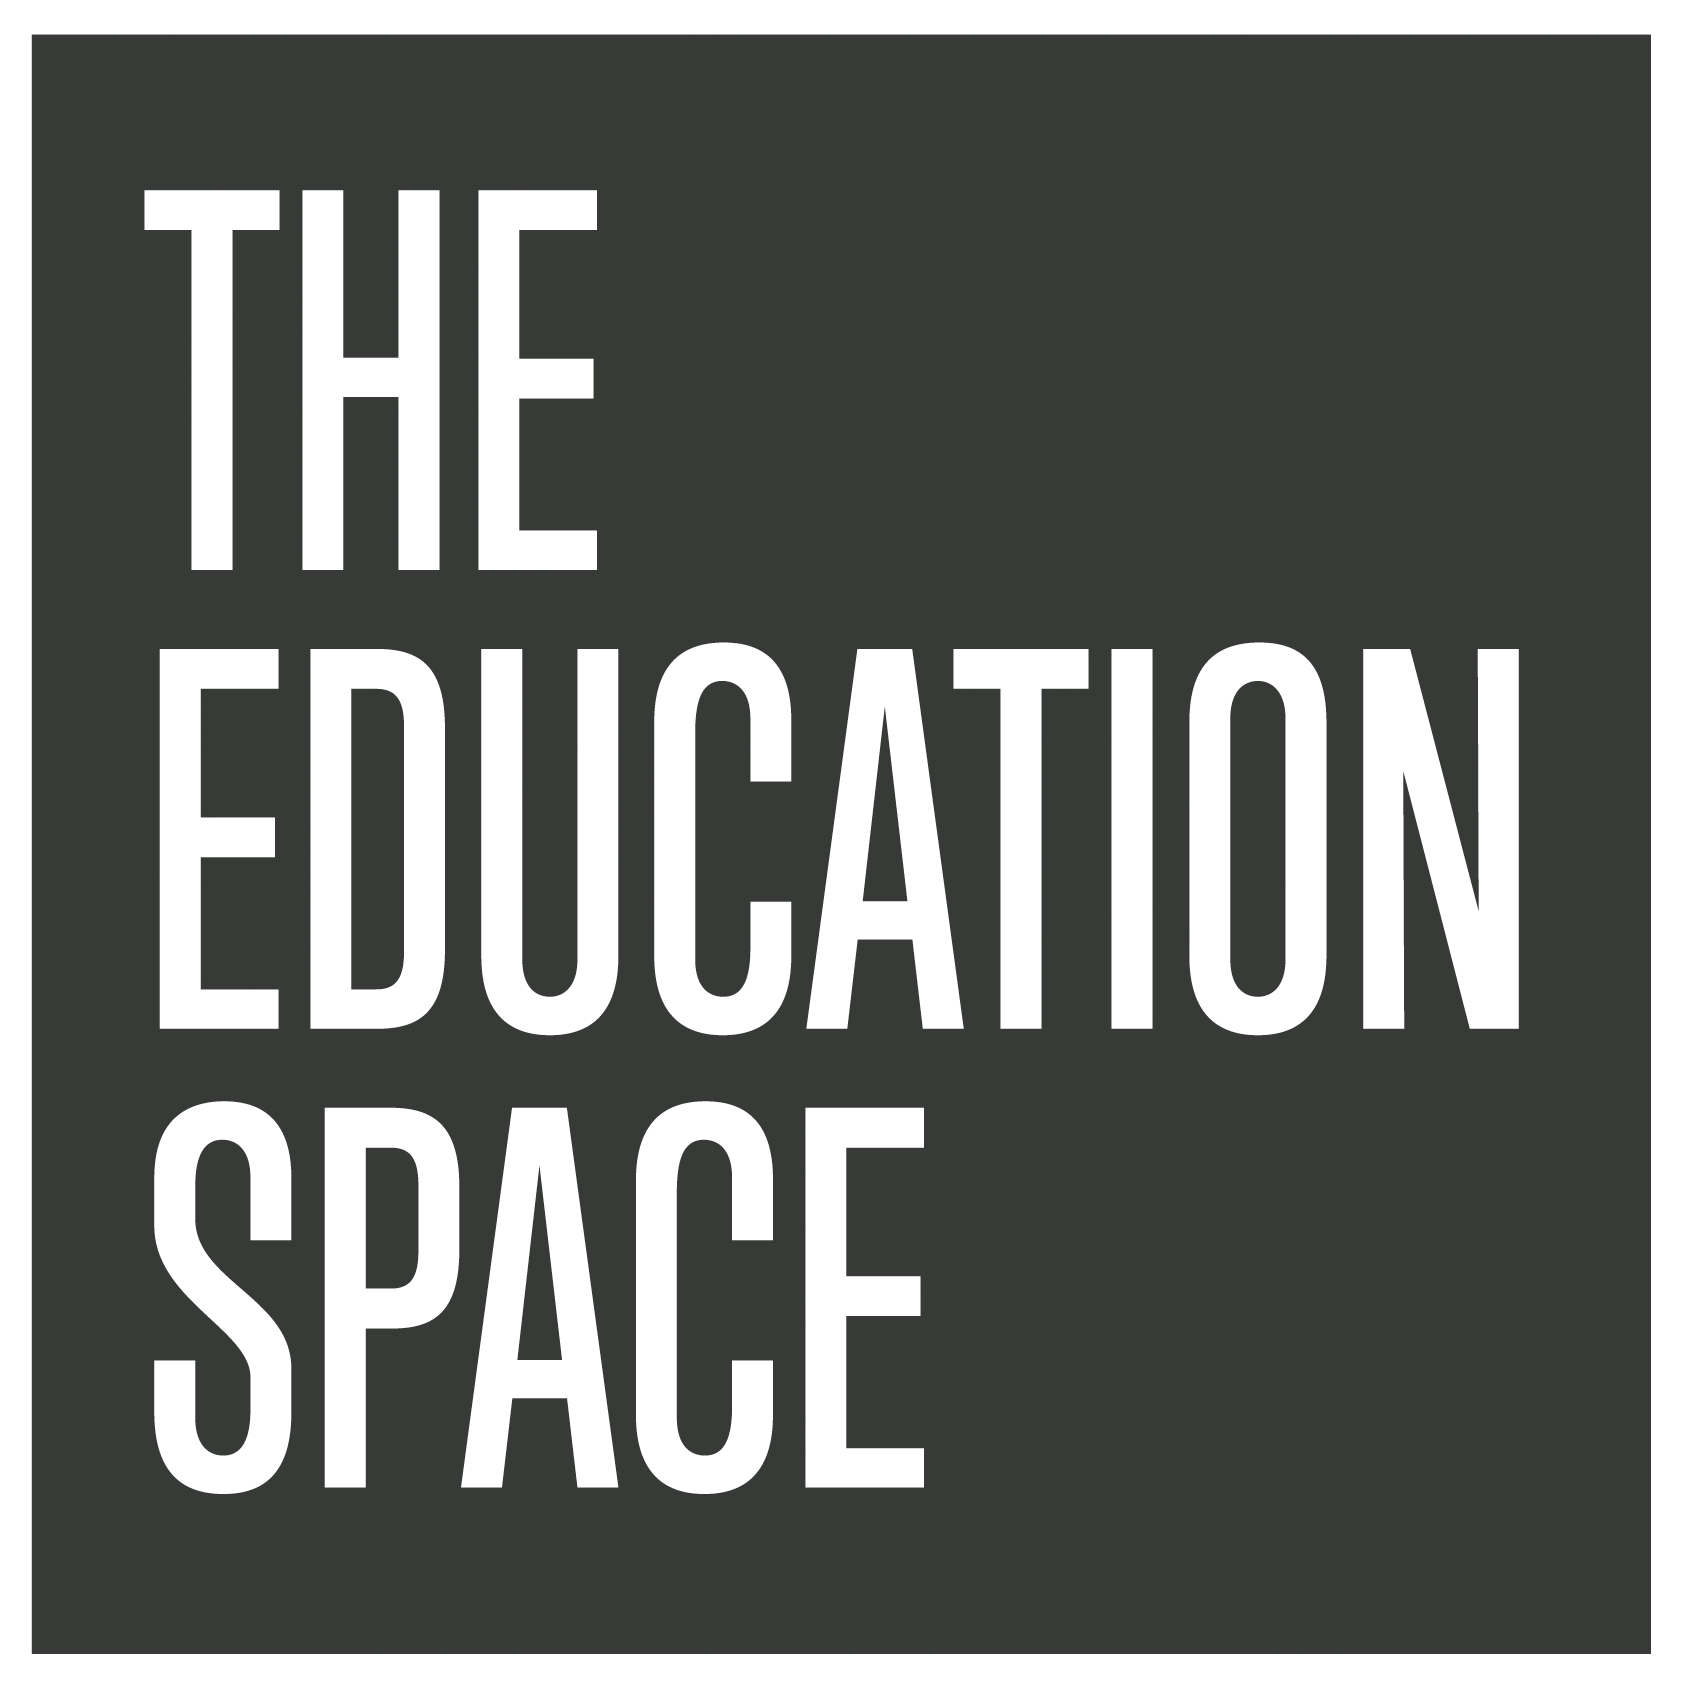 The Education Space